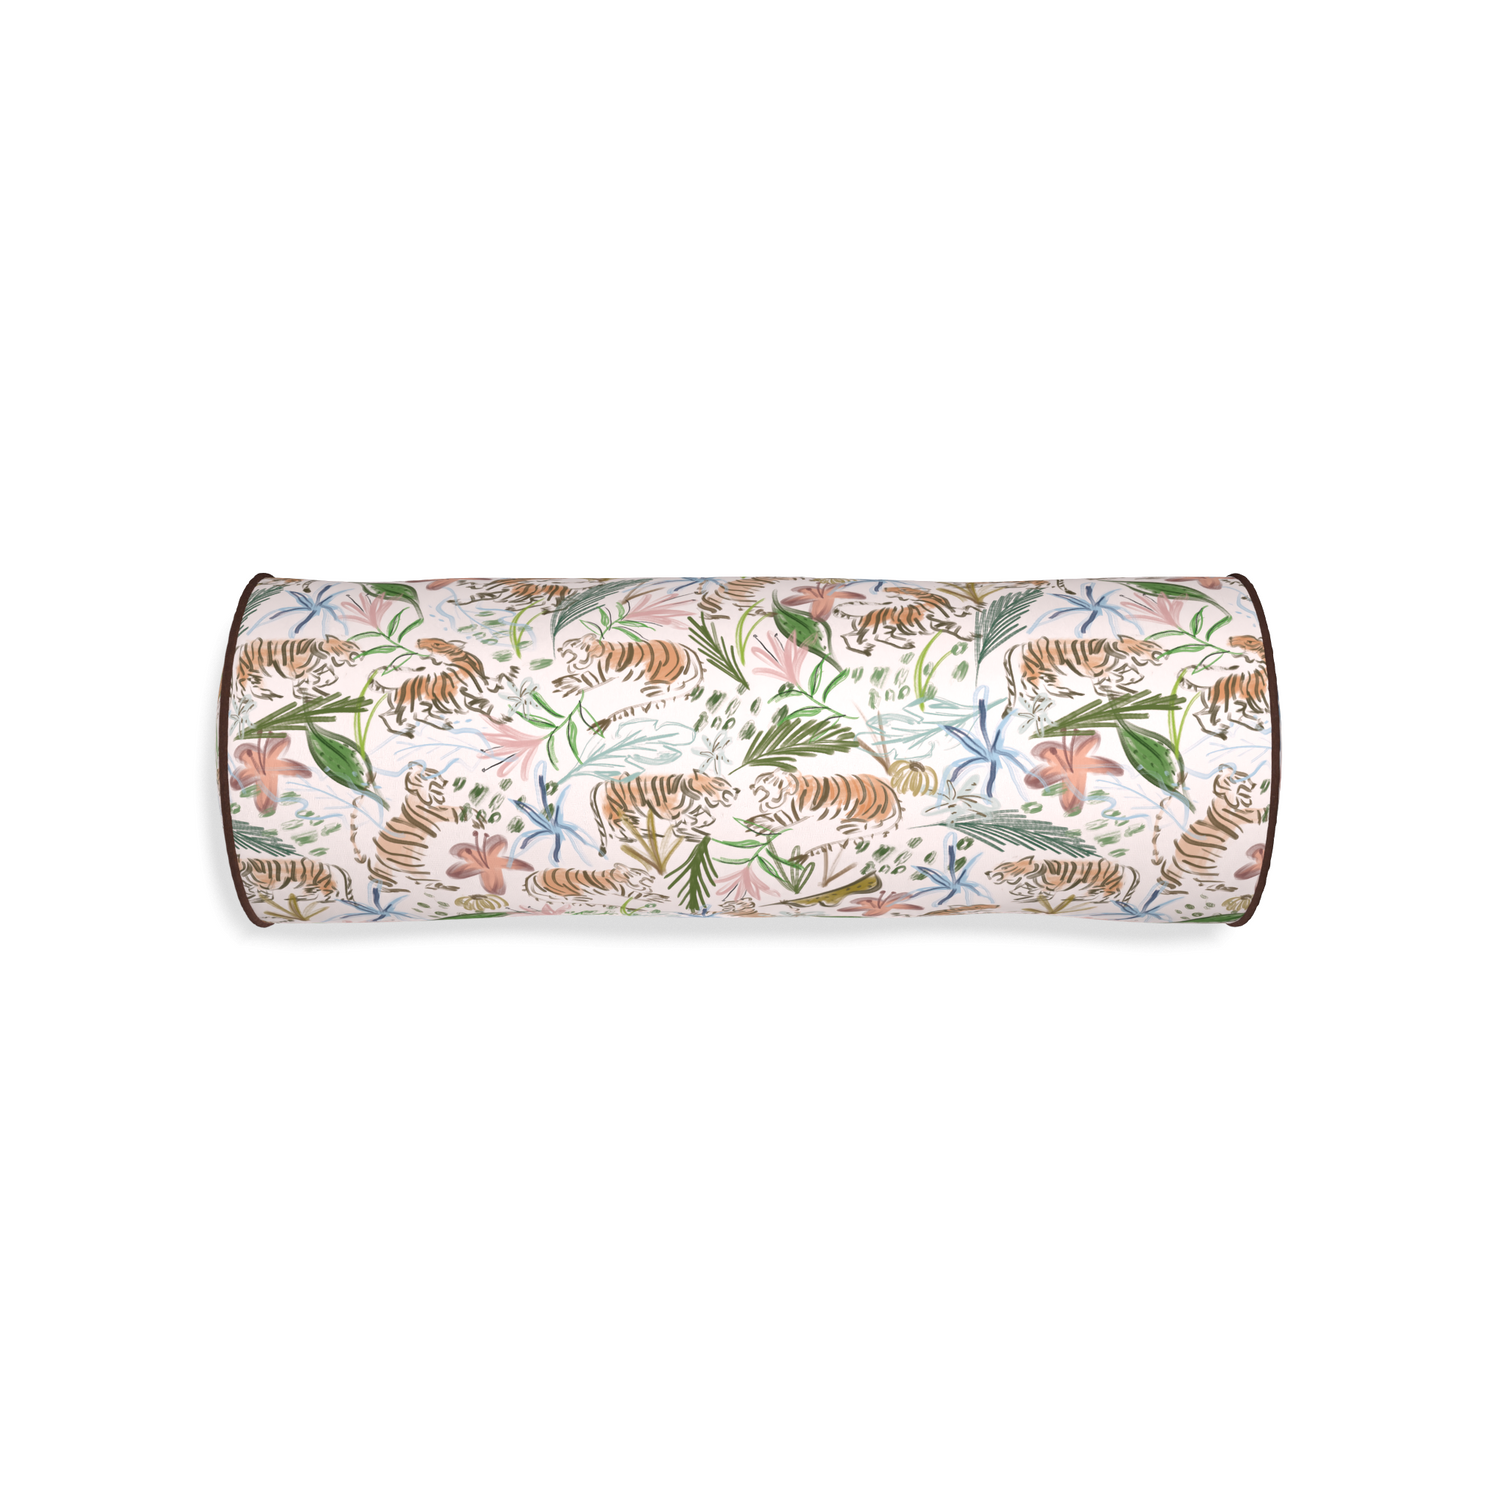 Bolster frida pink custom pink chinoiserie tigerpillow with w piping on white background